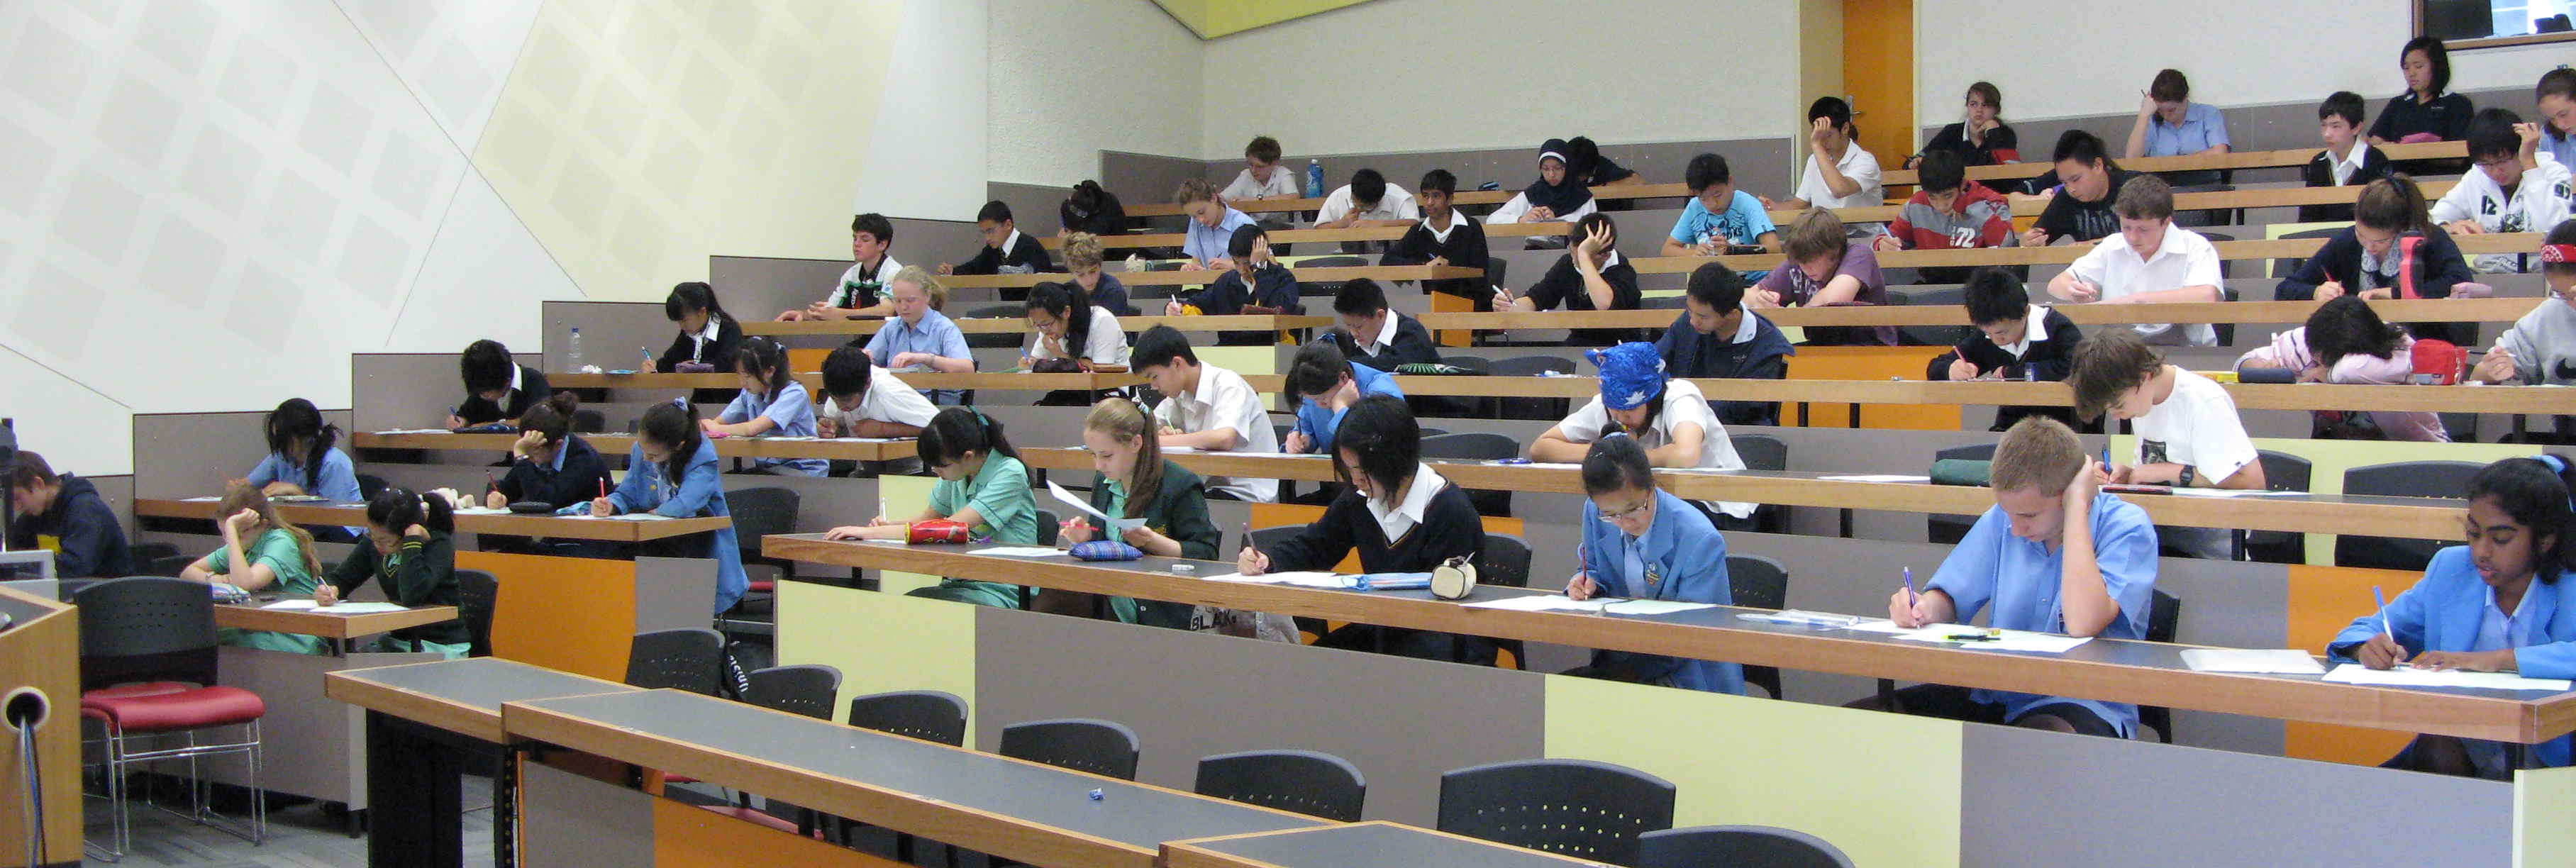 WAJO 2010: Individual Competition in Engineering Lecture Theatre 1